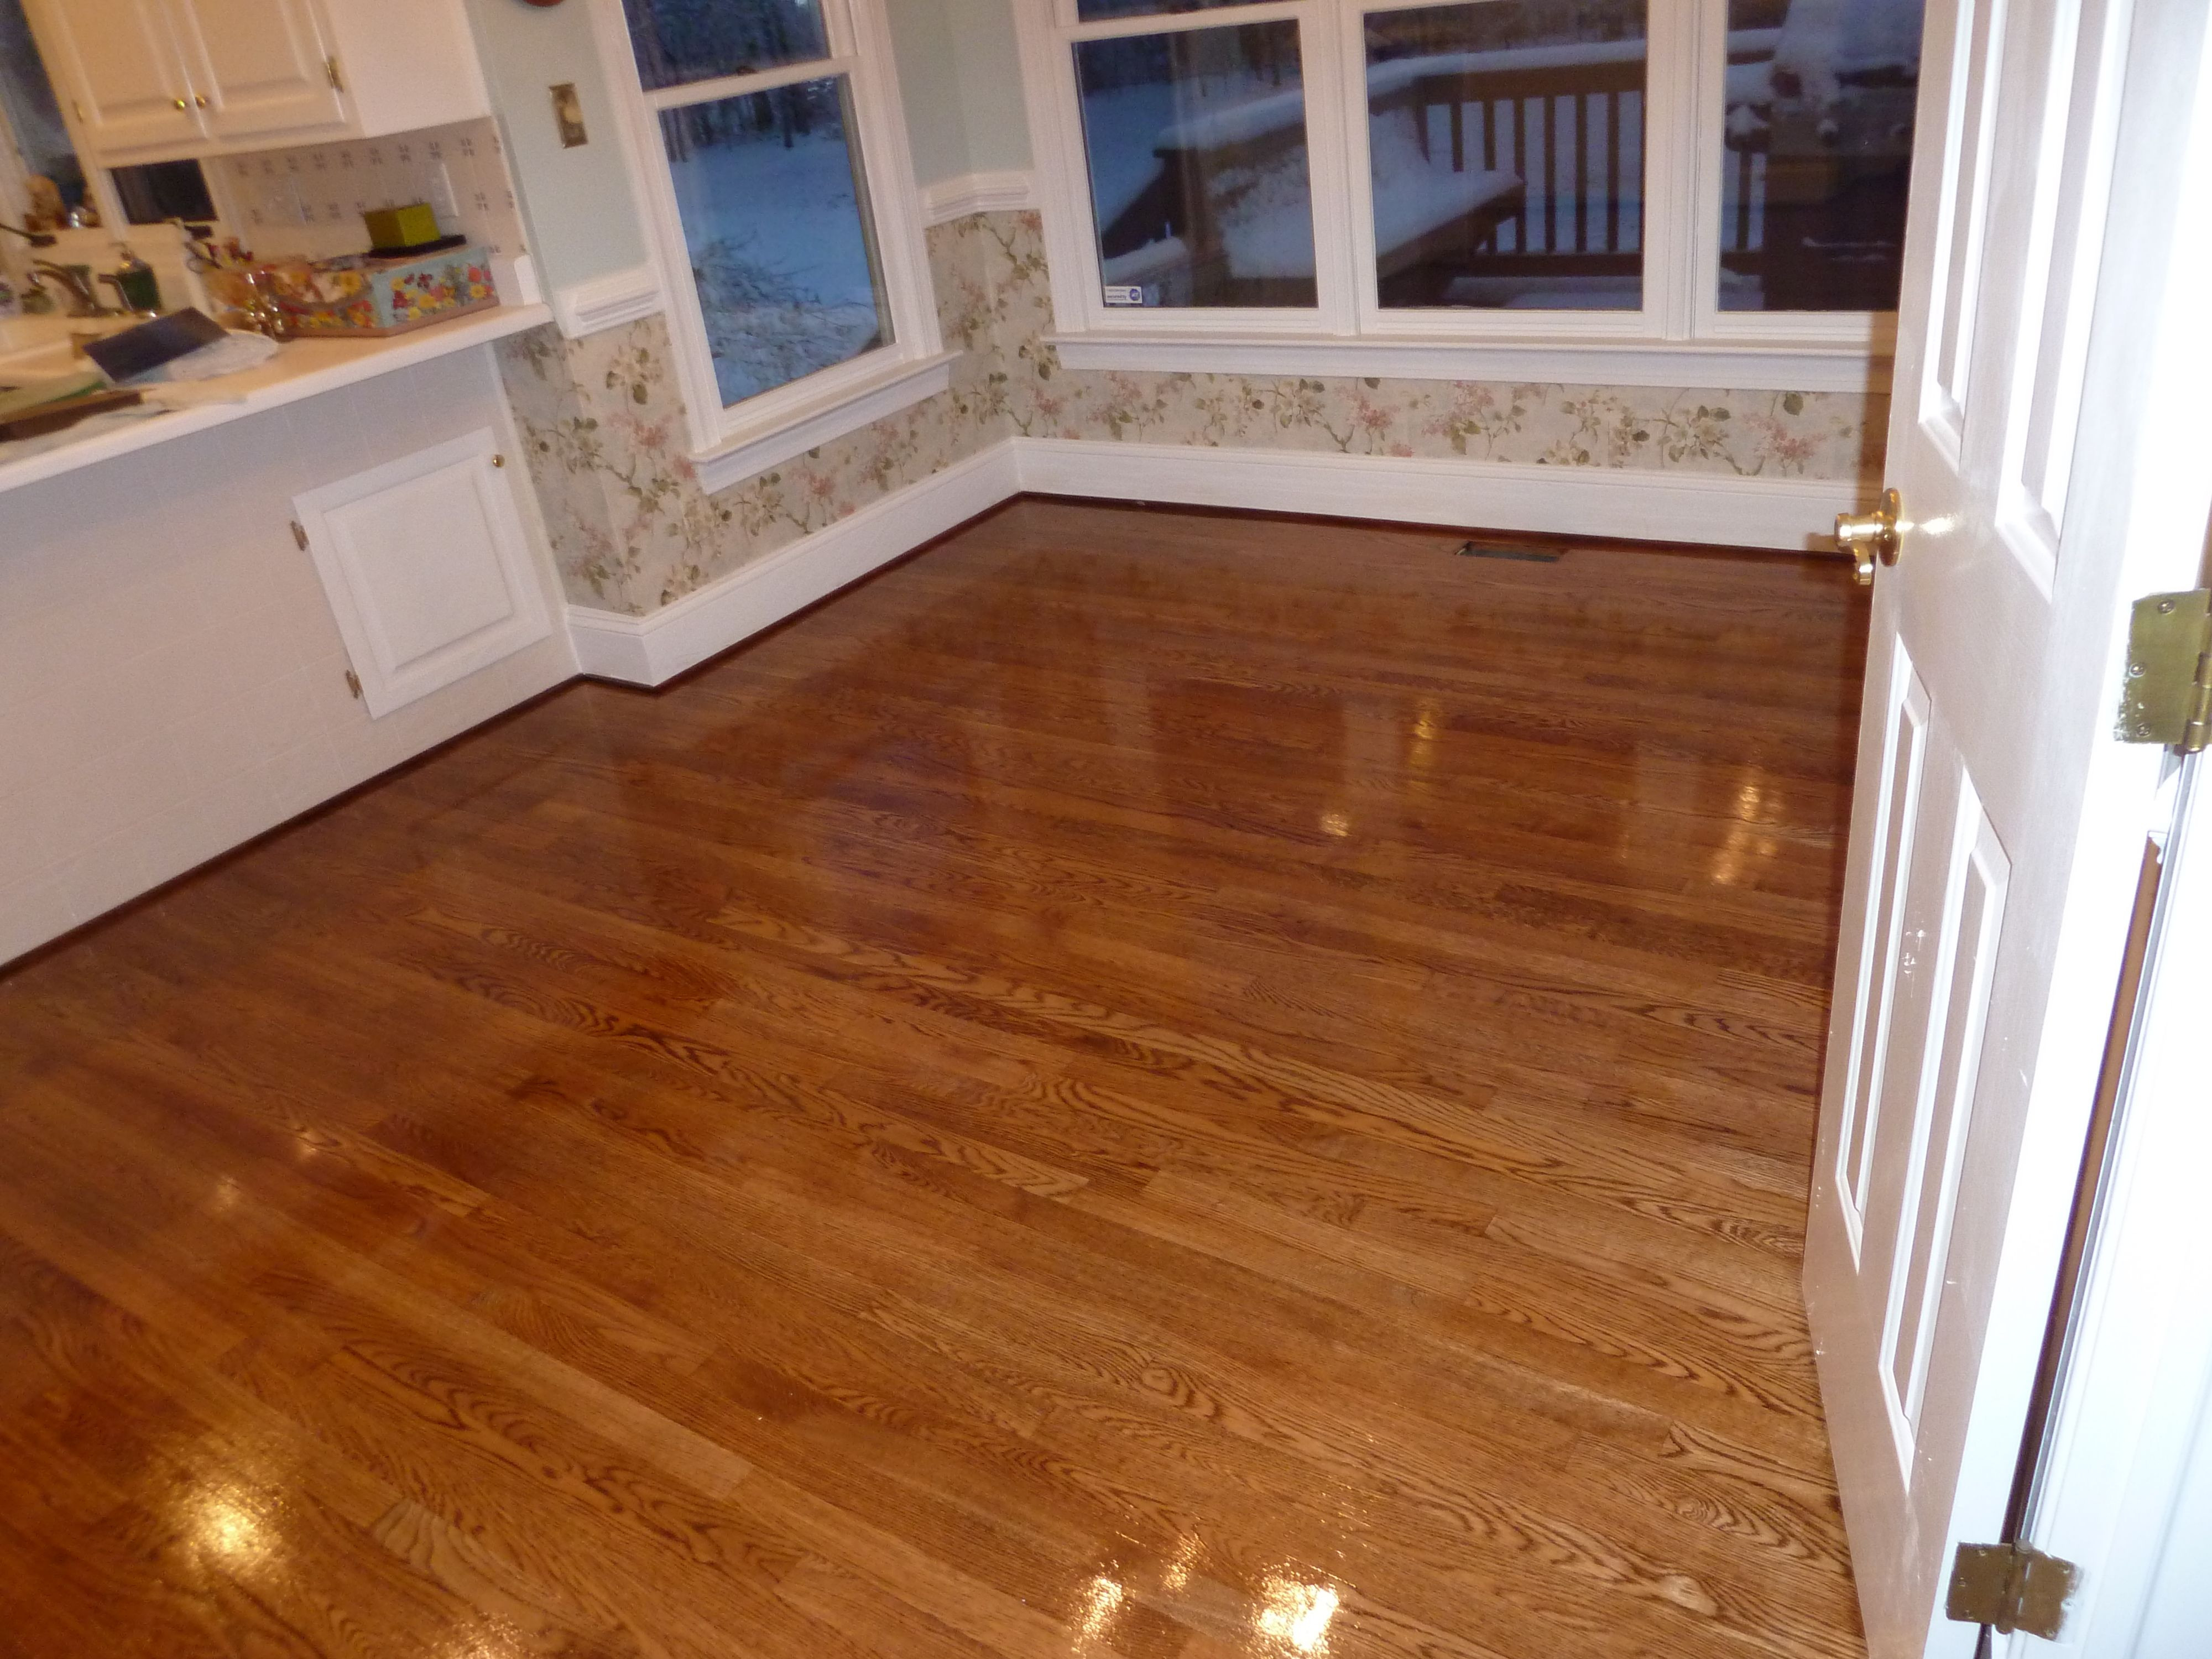 29 Stunning Hardwood Floor Refinishing Rockford Il 2024 free download hardwood floor refinishing rockford il of 2 3 4 red oak hardwood flooring stained golden oak and coated with throughout 2 3 4 red oak hardwood flooring stained golden oak and coated with a h